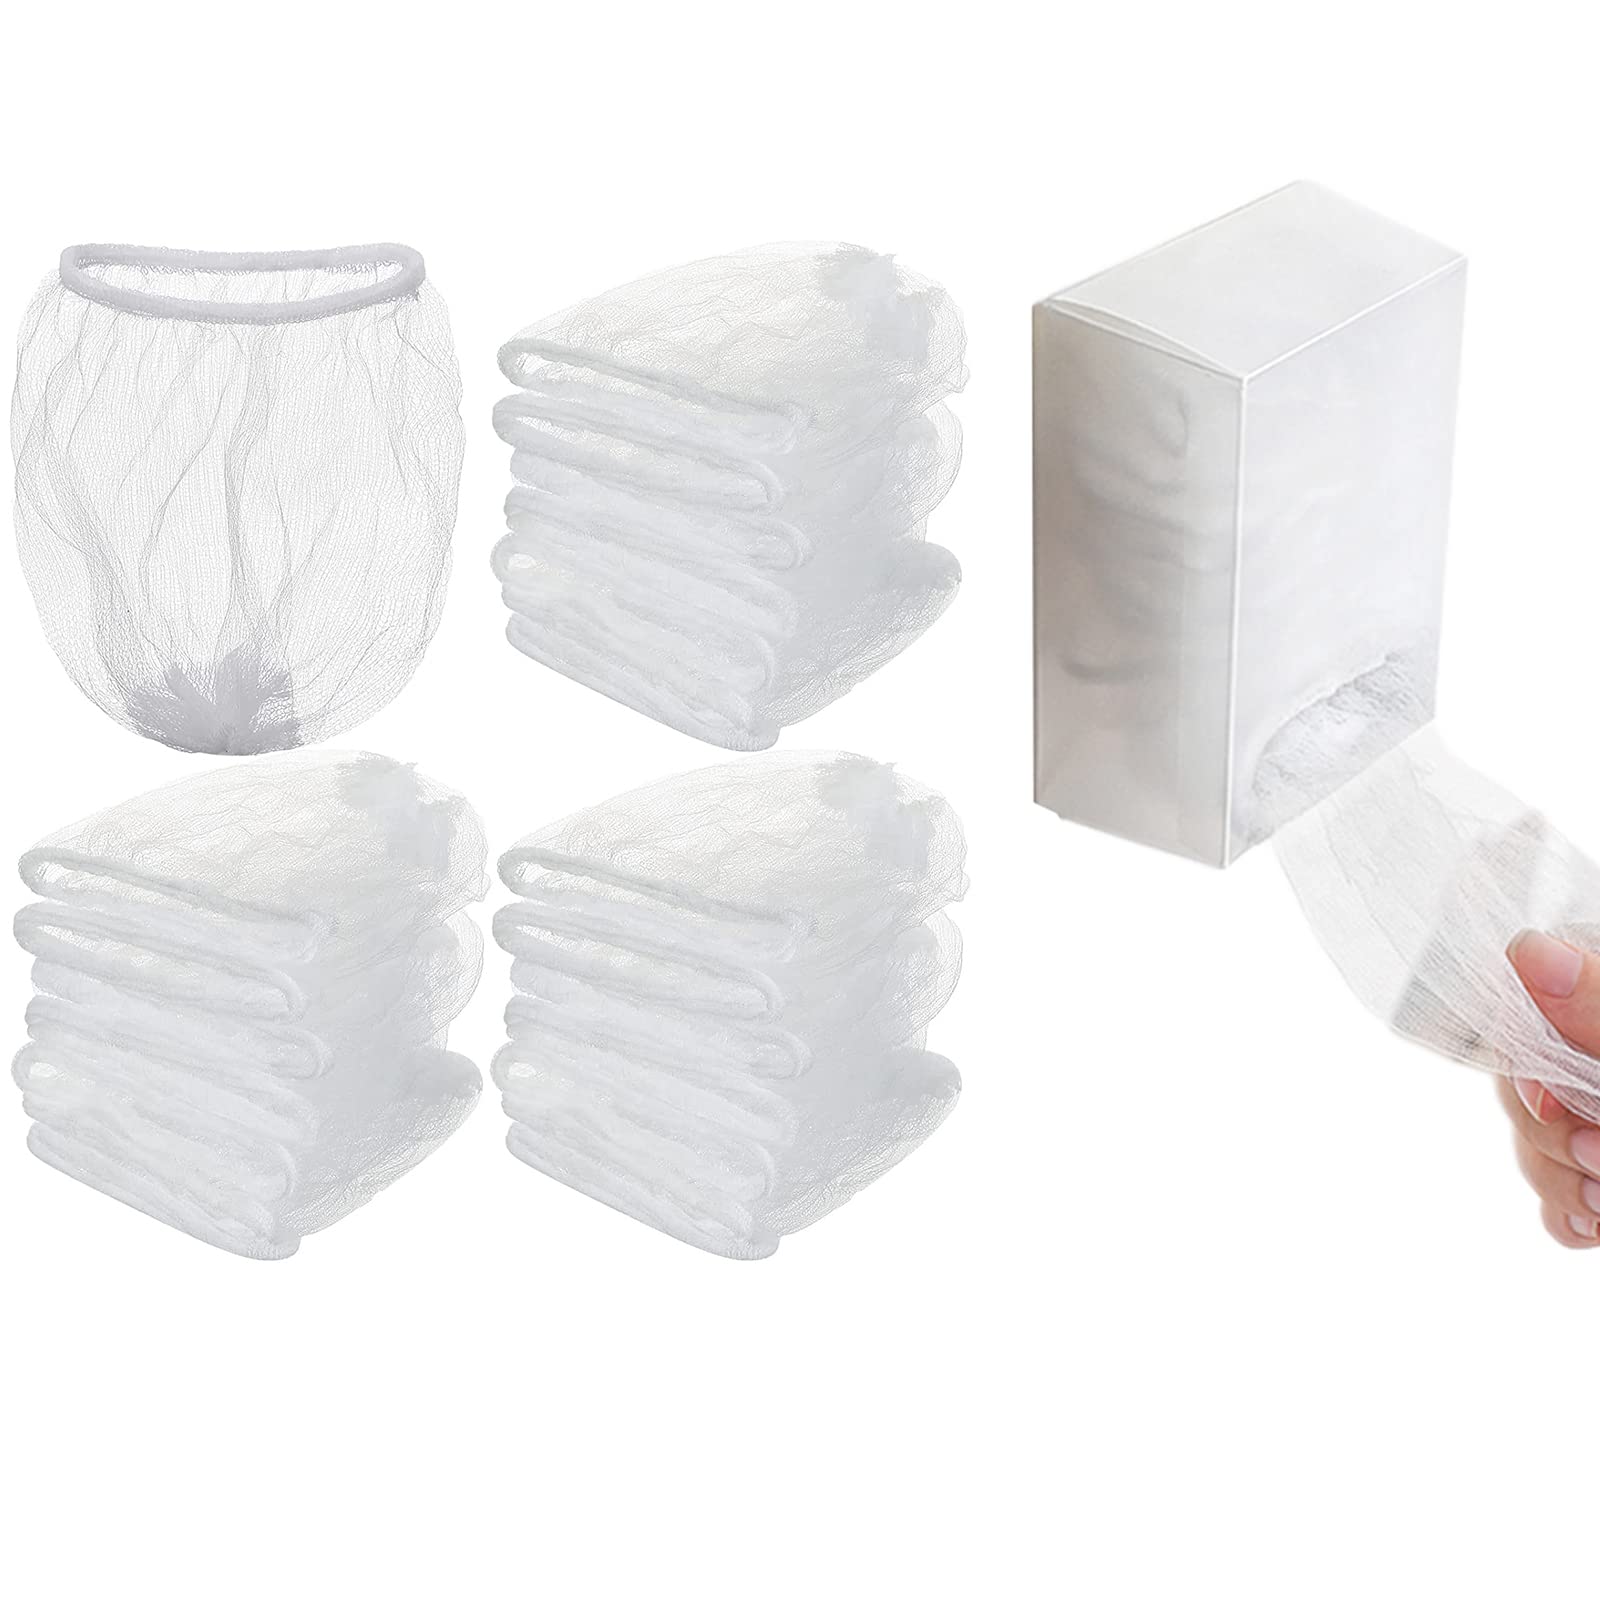 🔥SUMMER HOT SALE-50% OFF🔥Kitchen Residue Filter Screen Holder(🔥Includes 100 nets)